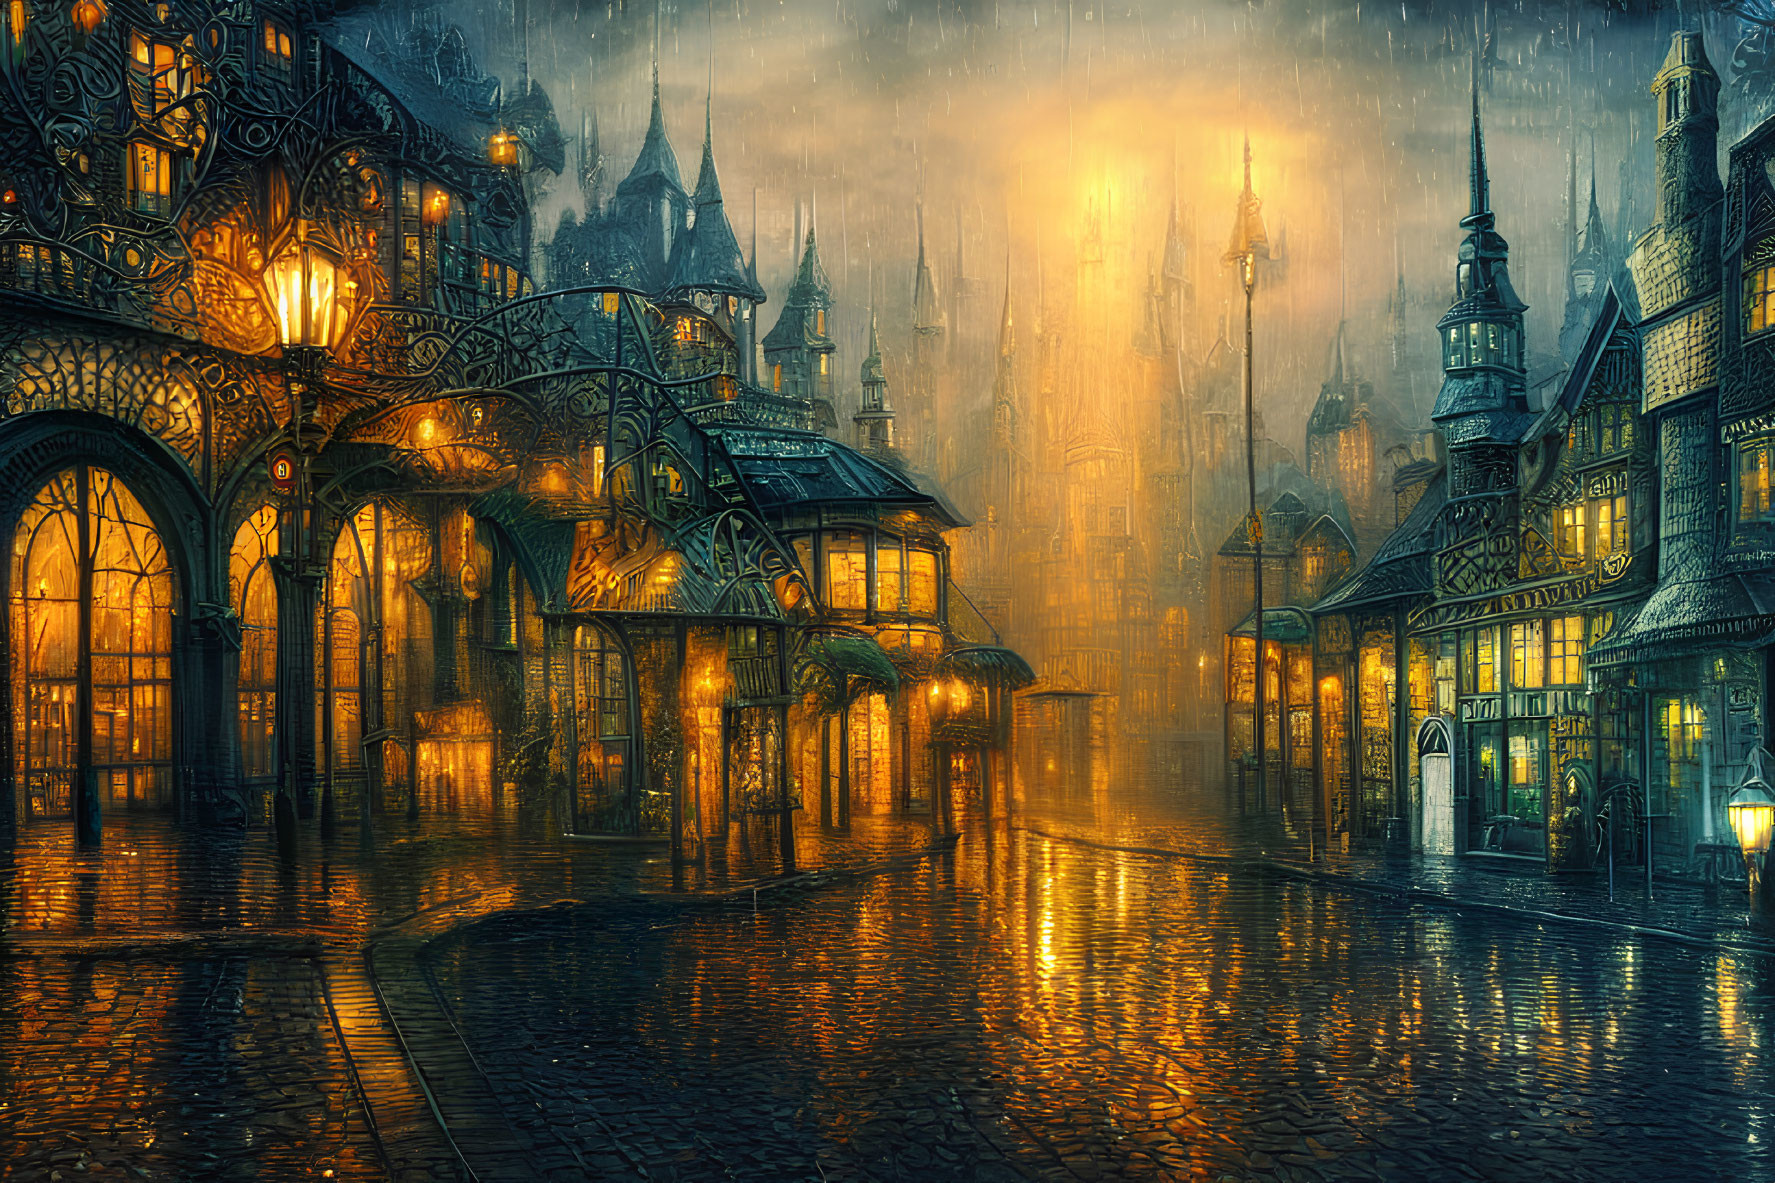 Gothic buildings on cobblestoned street at night with golden streetlights under rainy sky